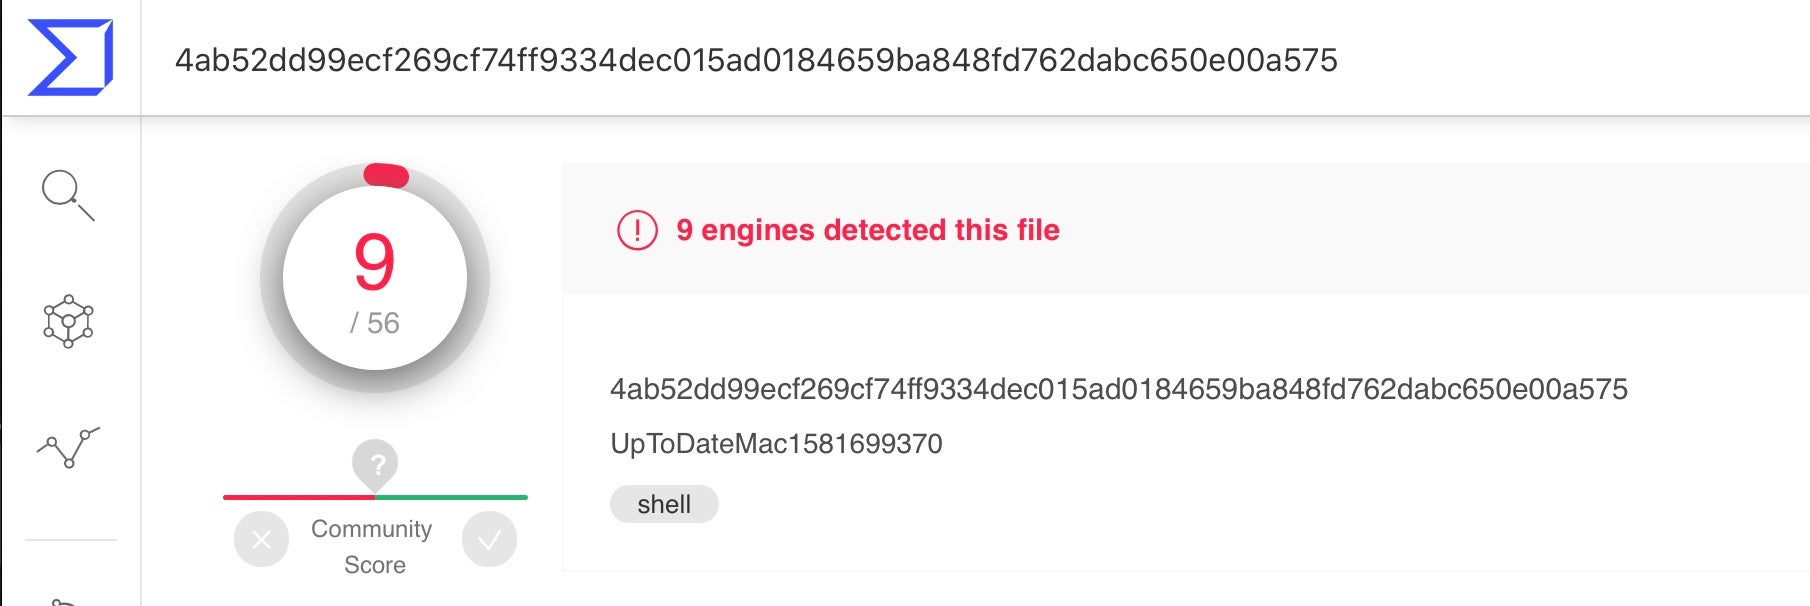 image of malicious adware script UpToDateMac being detected on VirusTotal